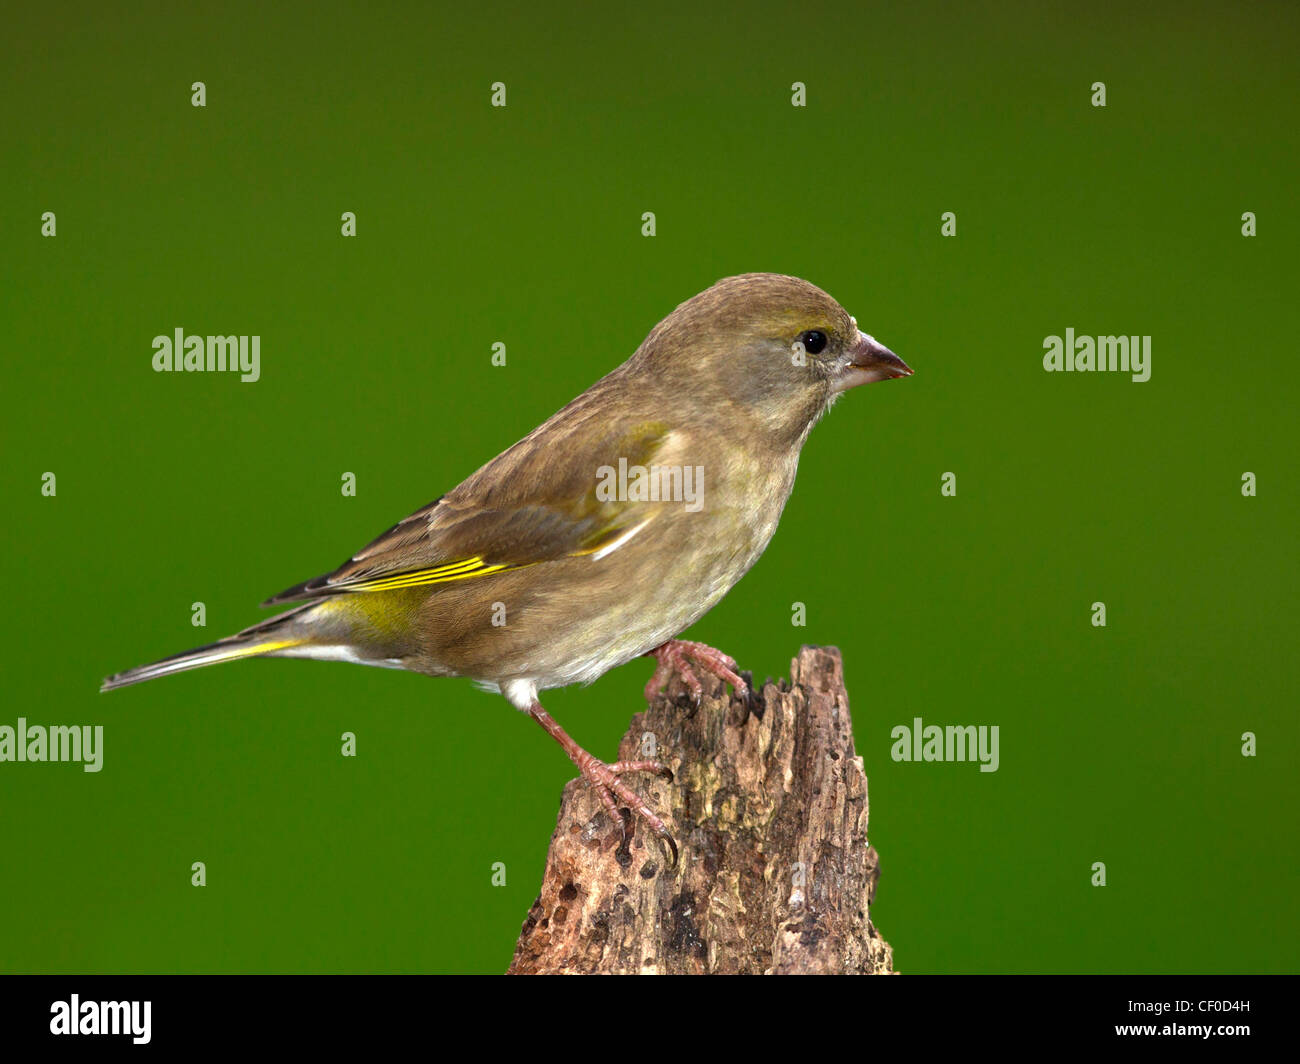 Female greenfinch perched on tree stump Stock Photo